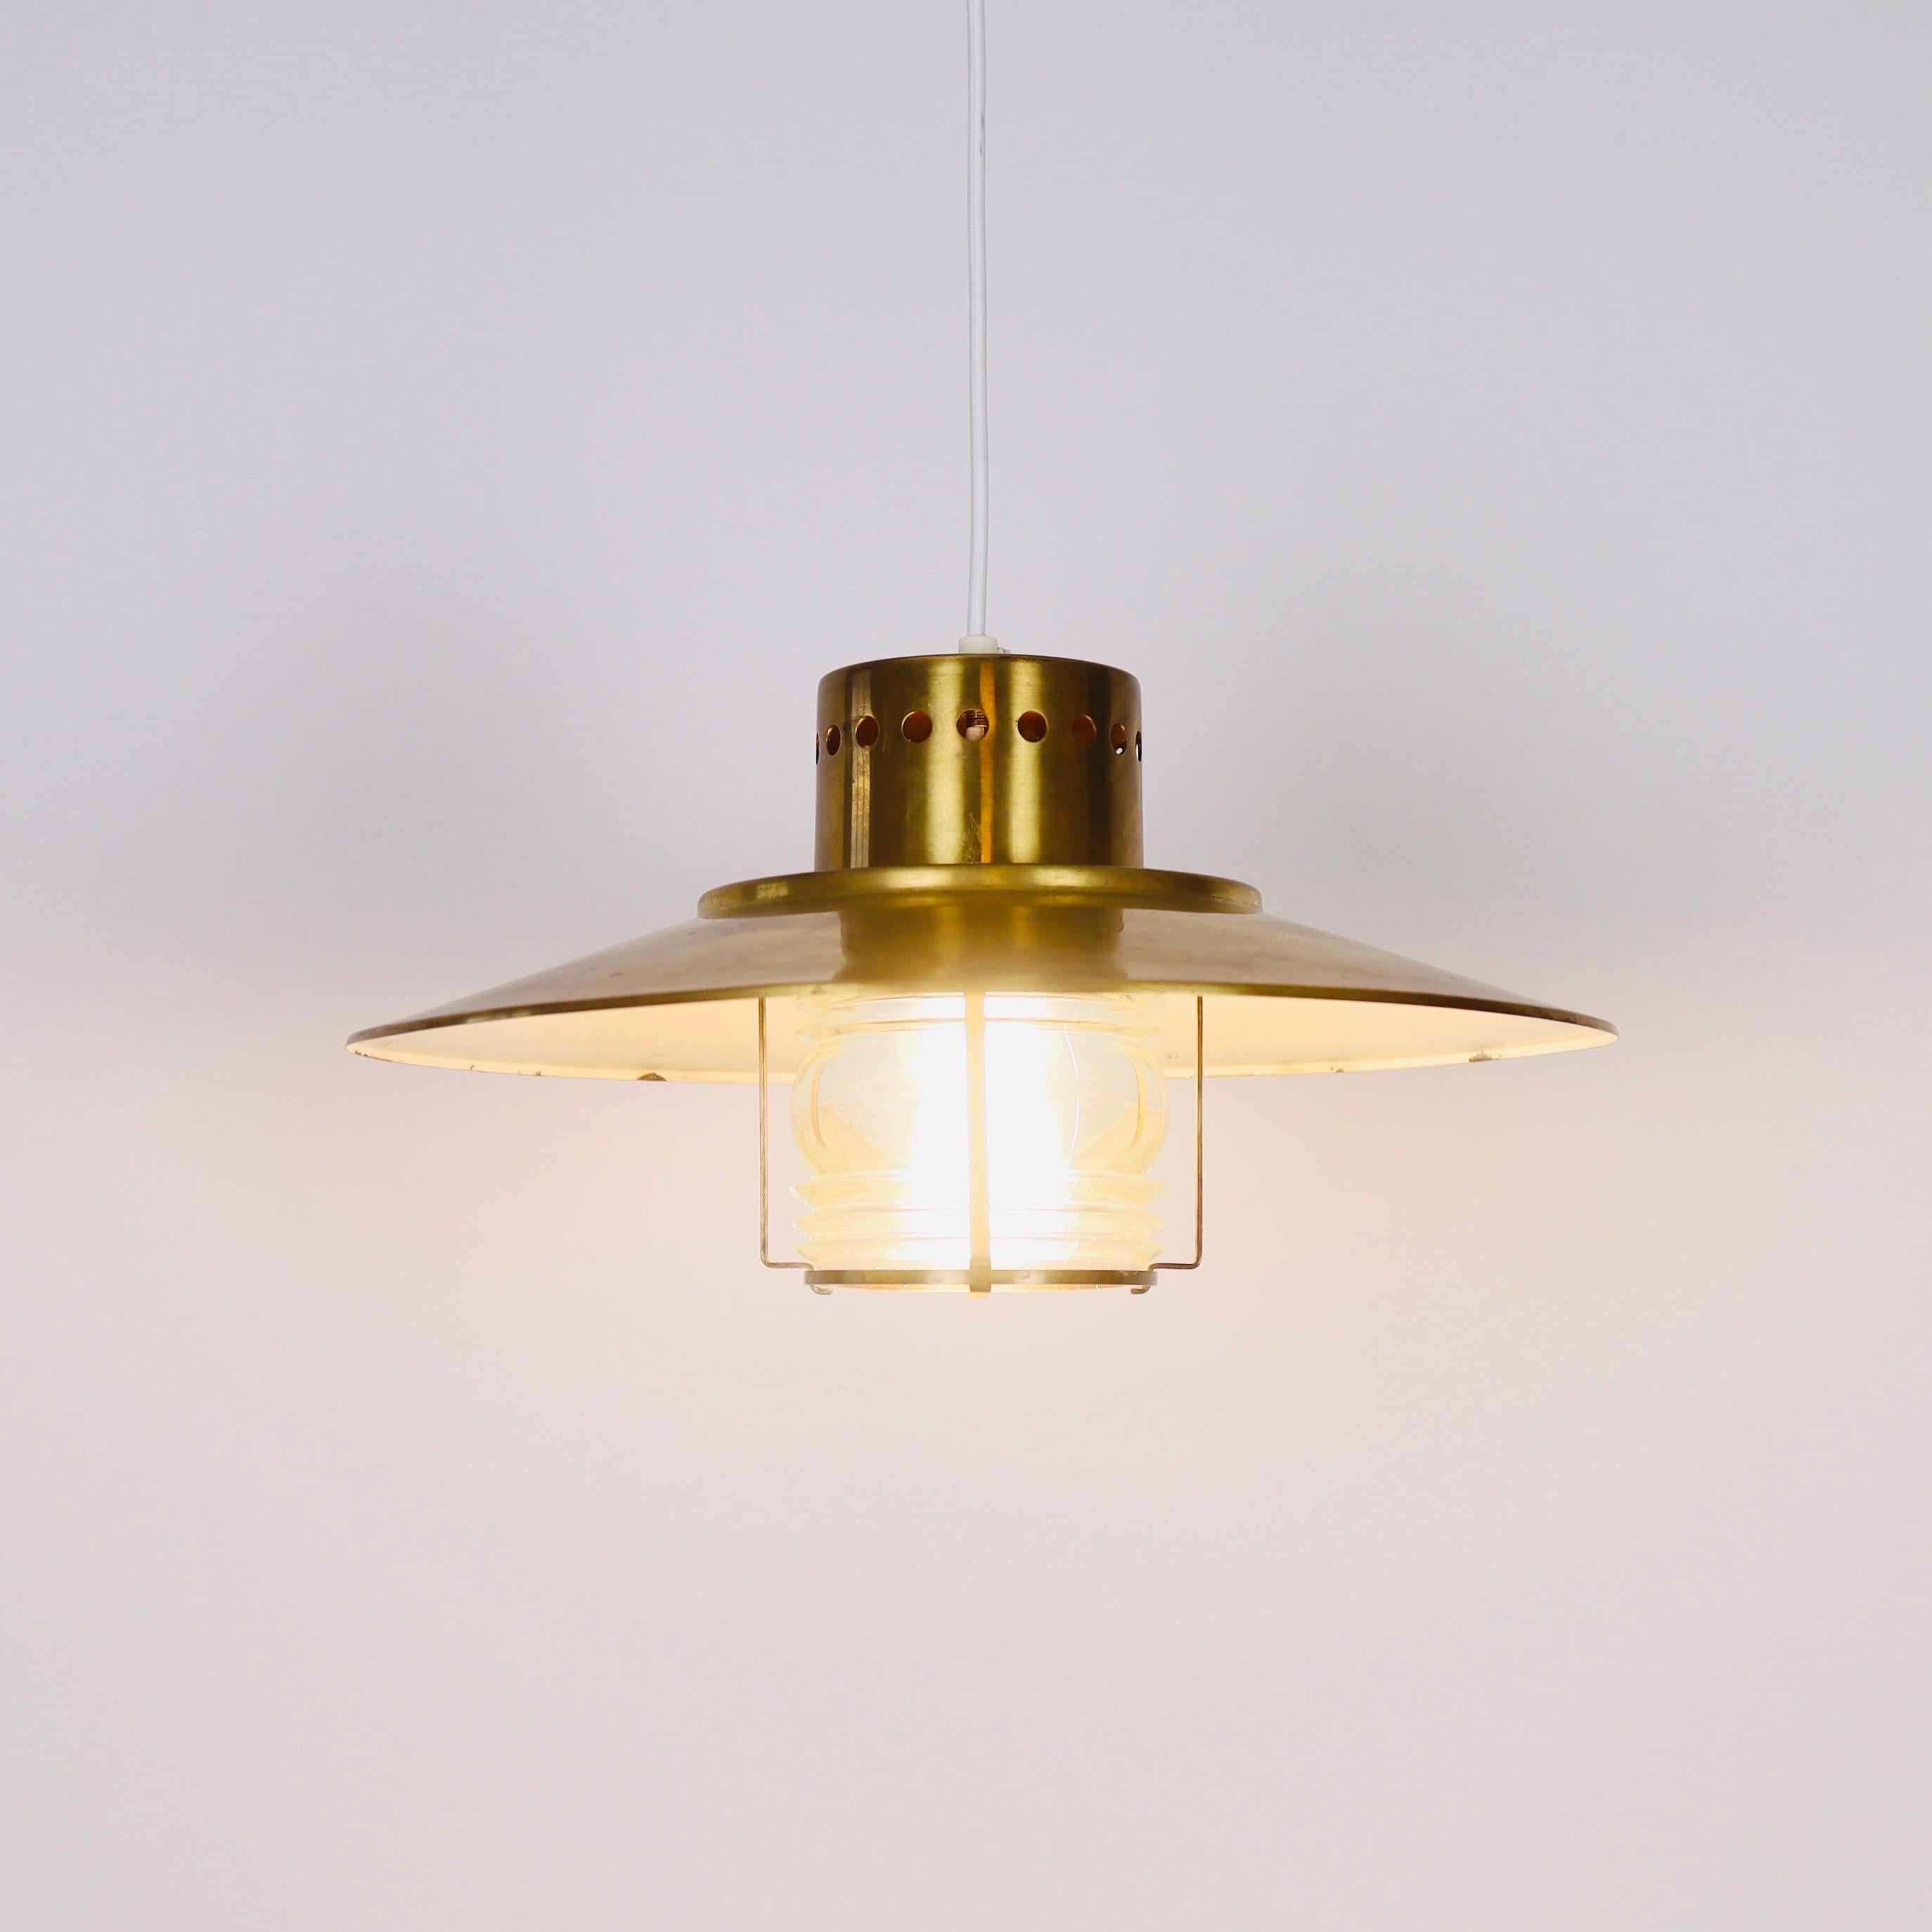 A brass and glass pendant light designed Svend Aage Holm Sørensen in the 1960s. A maritime addition to a modern setting. 

* A brass pendant light with an inner glass shade - eggwhite on the inside.  
* Designer: Svend Aage Holm Sørensen
* Style: